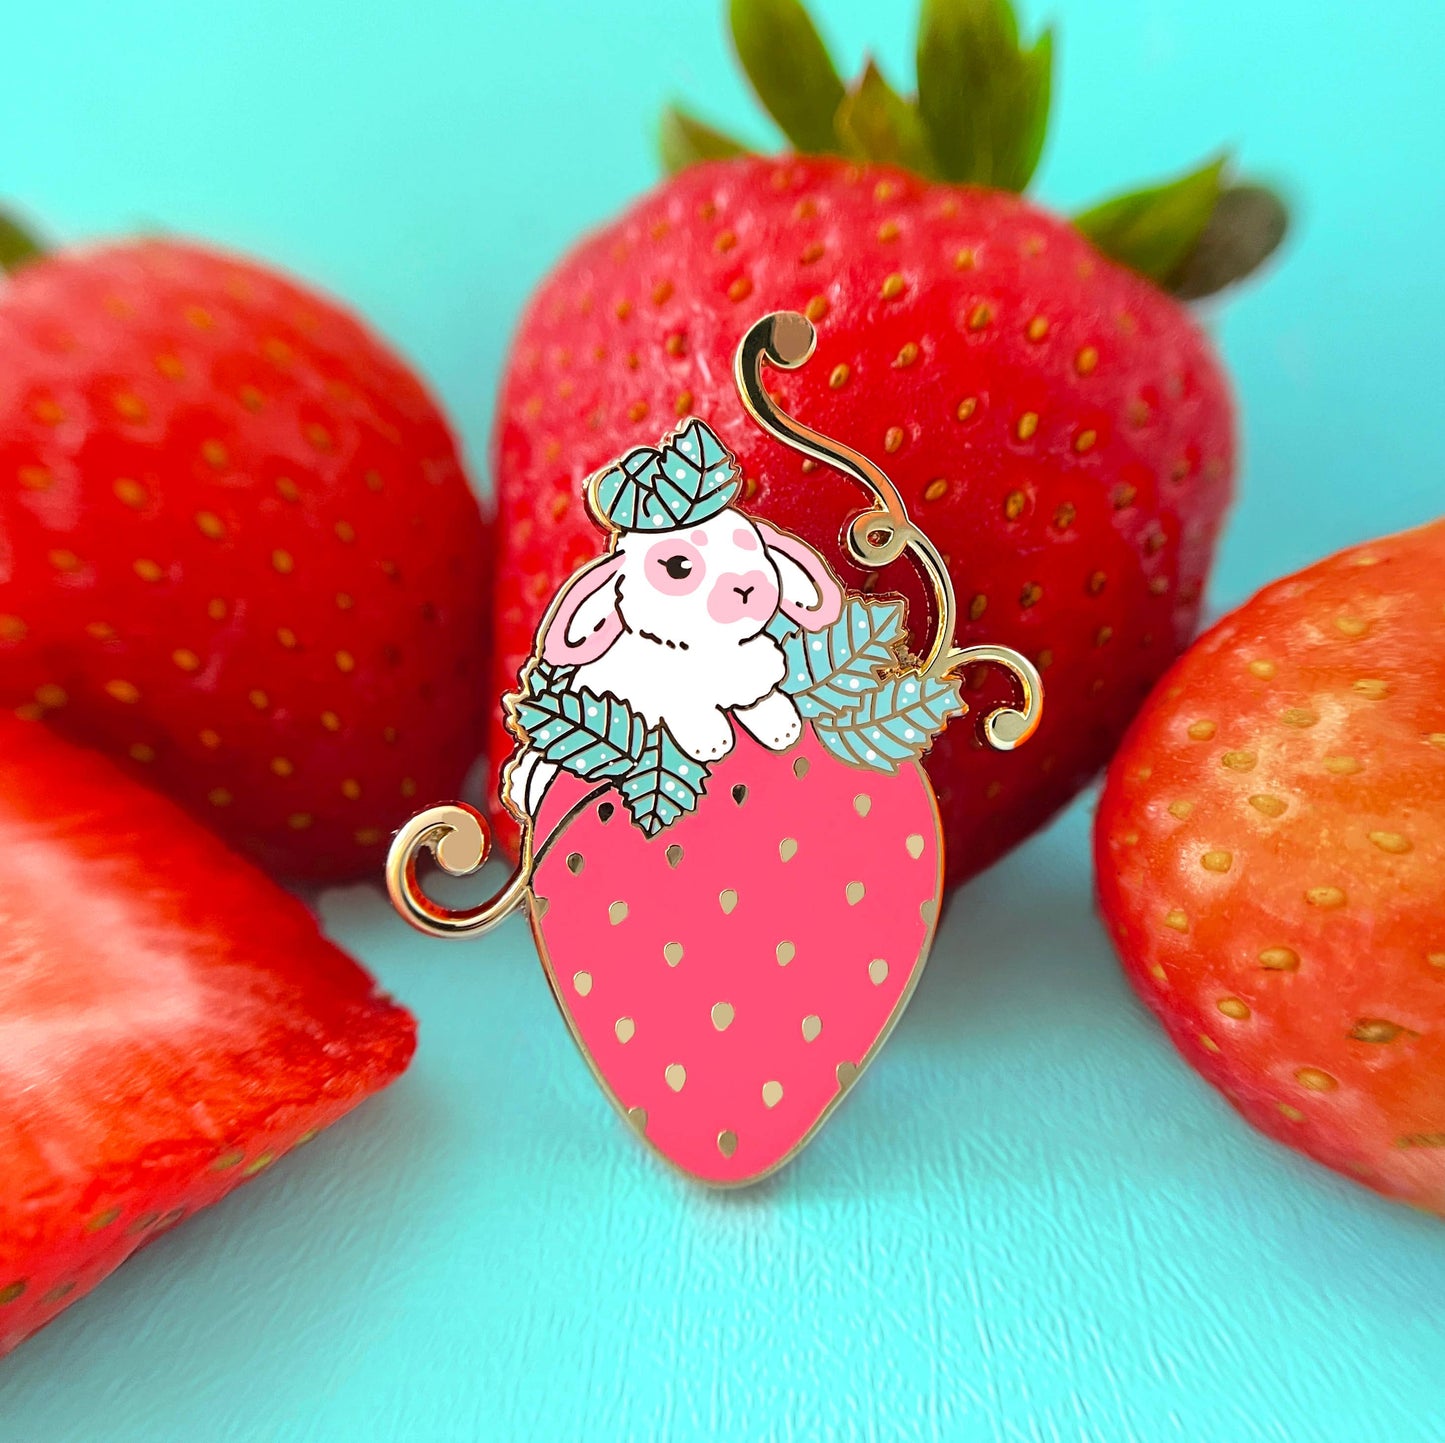 Strawberry Rabbit Enamel Pin - expected mid August - reserve now!